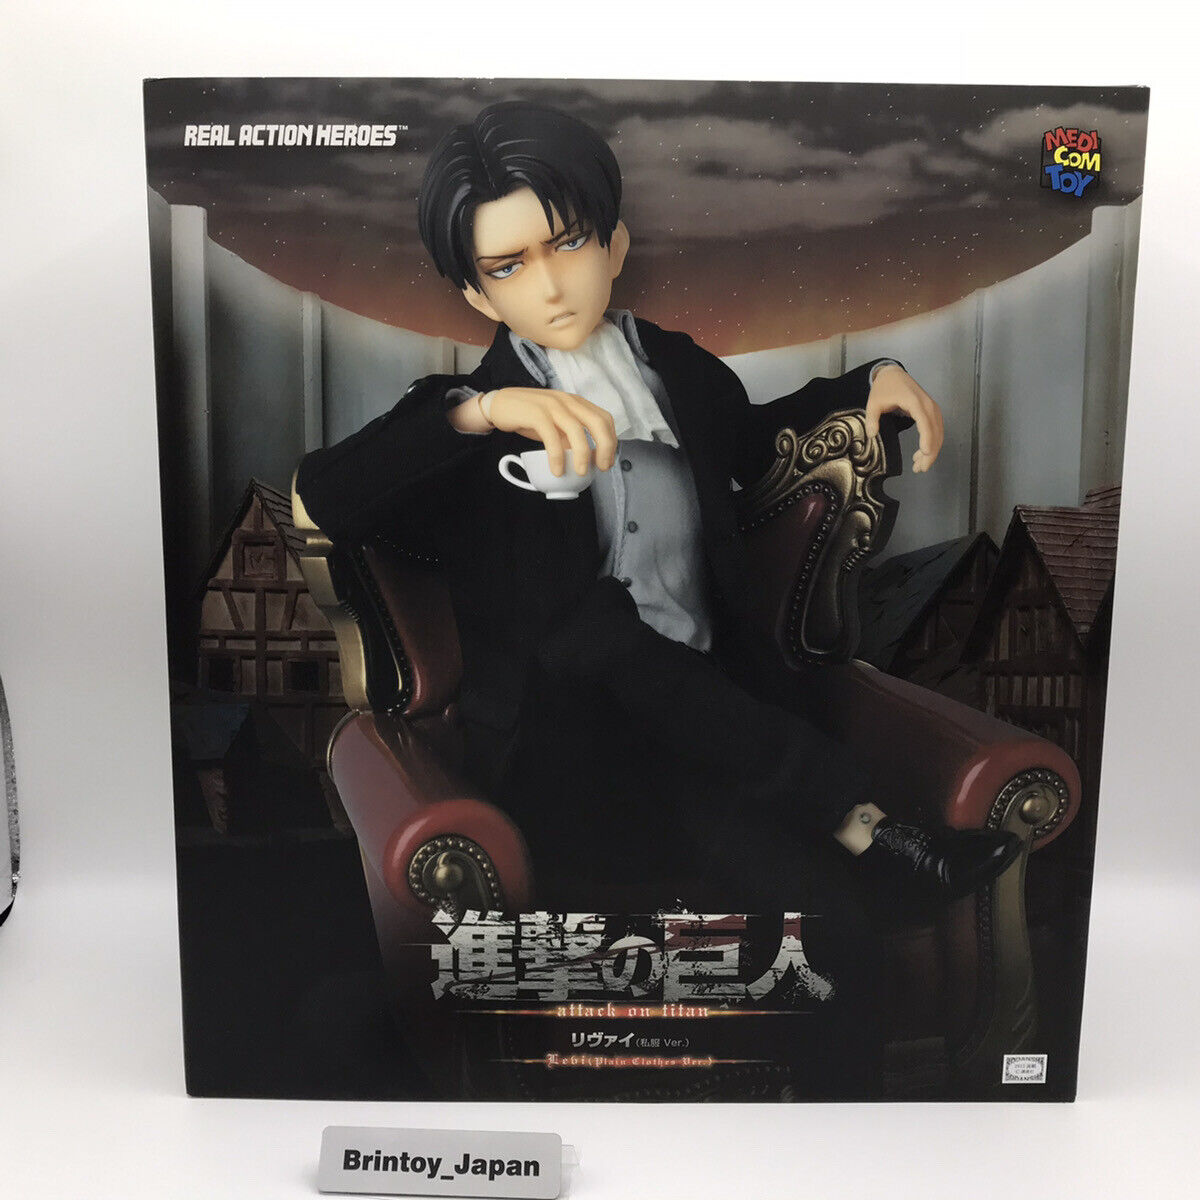 RAH Levi Medicom Toy Attack on Titan Suit Ver. Figure Real Action Heroes 1/6 